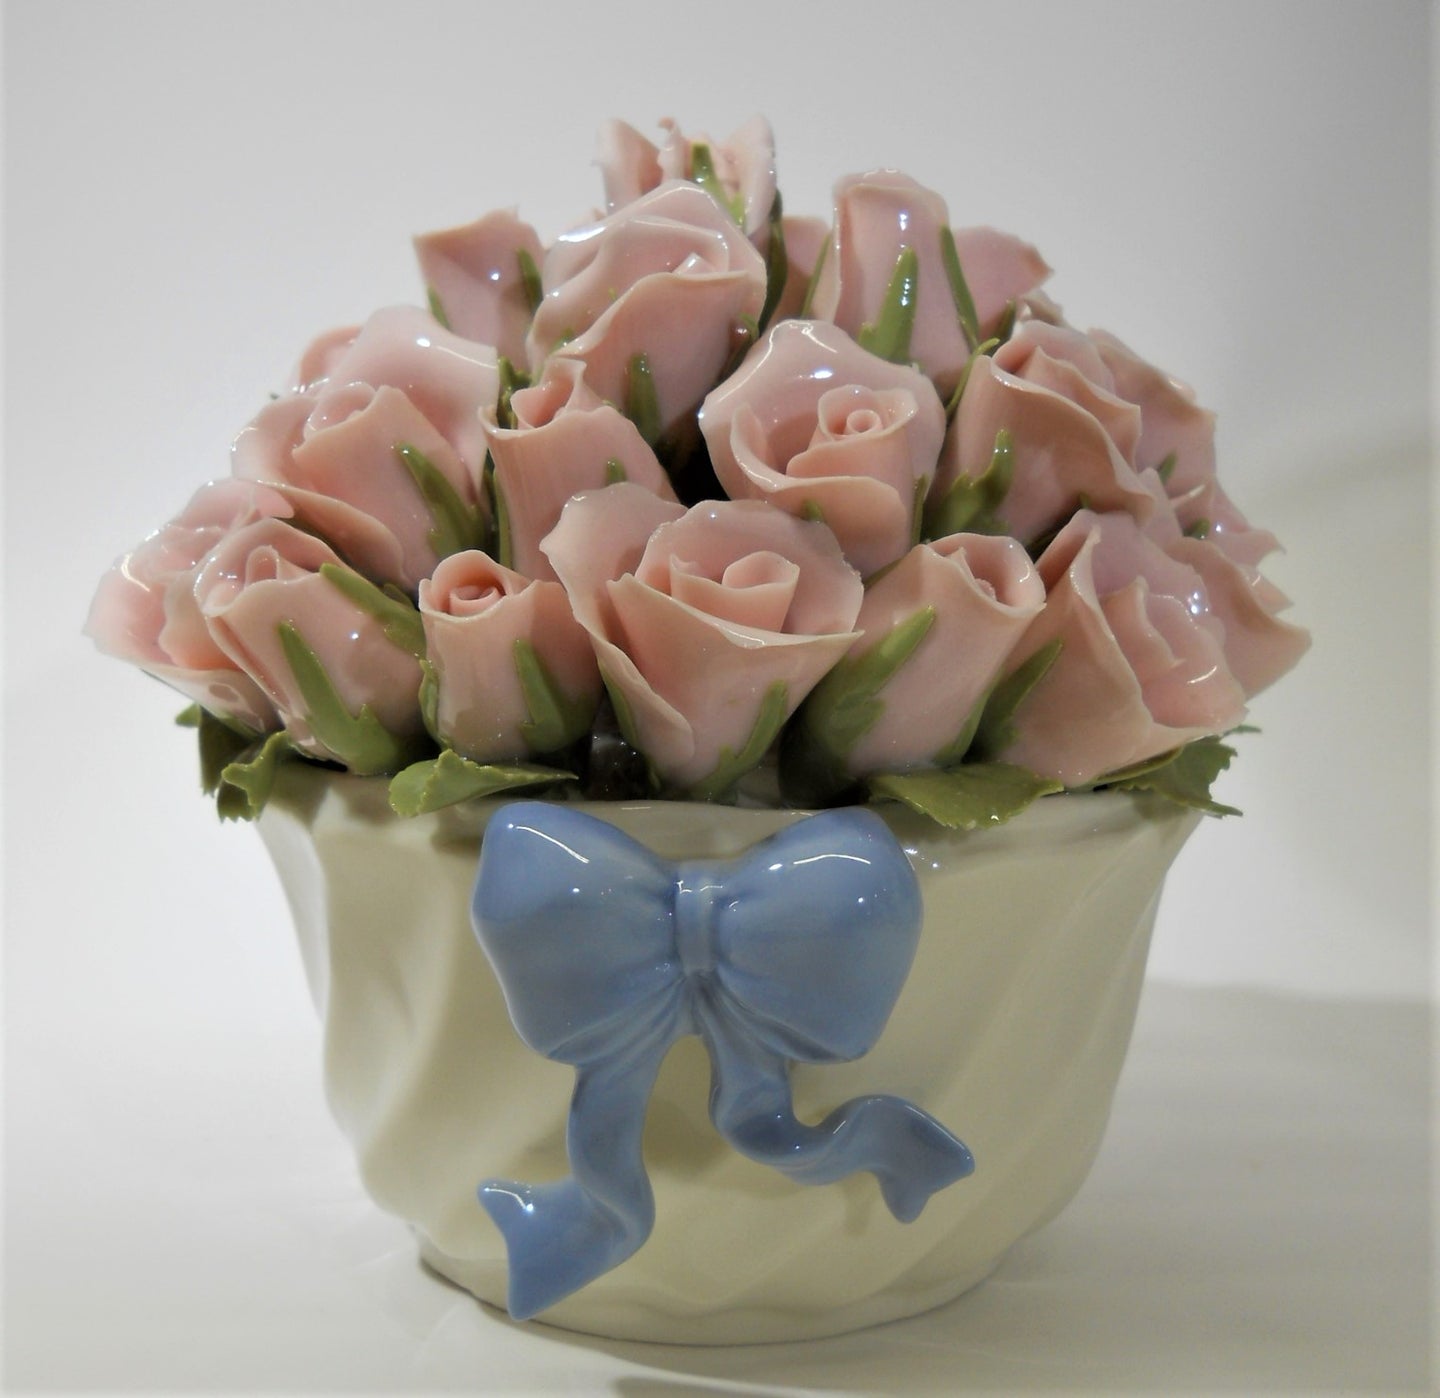 Pink Roses Bouquet 